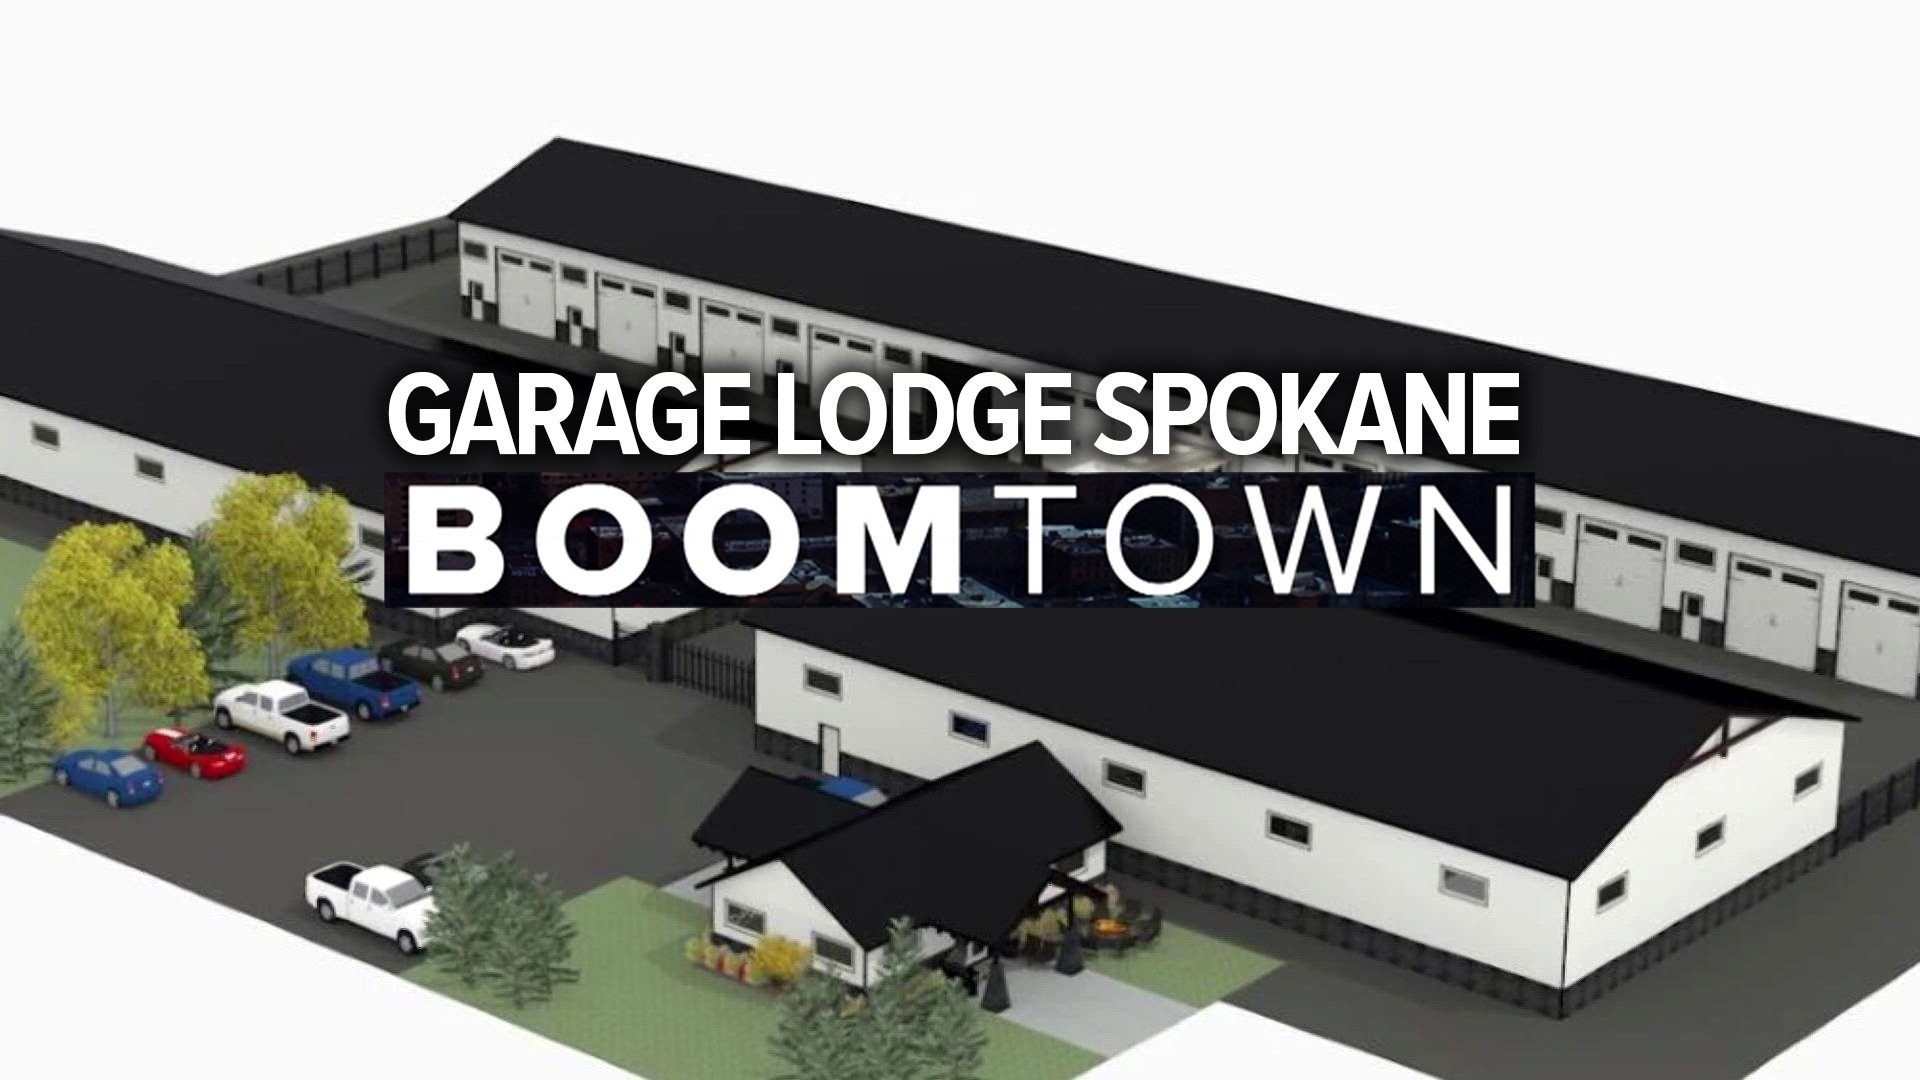 Garage Lodge will offer private garage spaces that people can purchase and use for storage, office space, or other purposes.